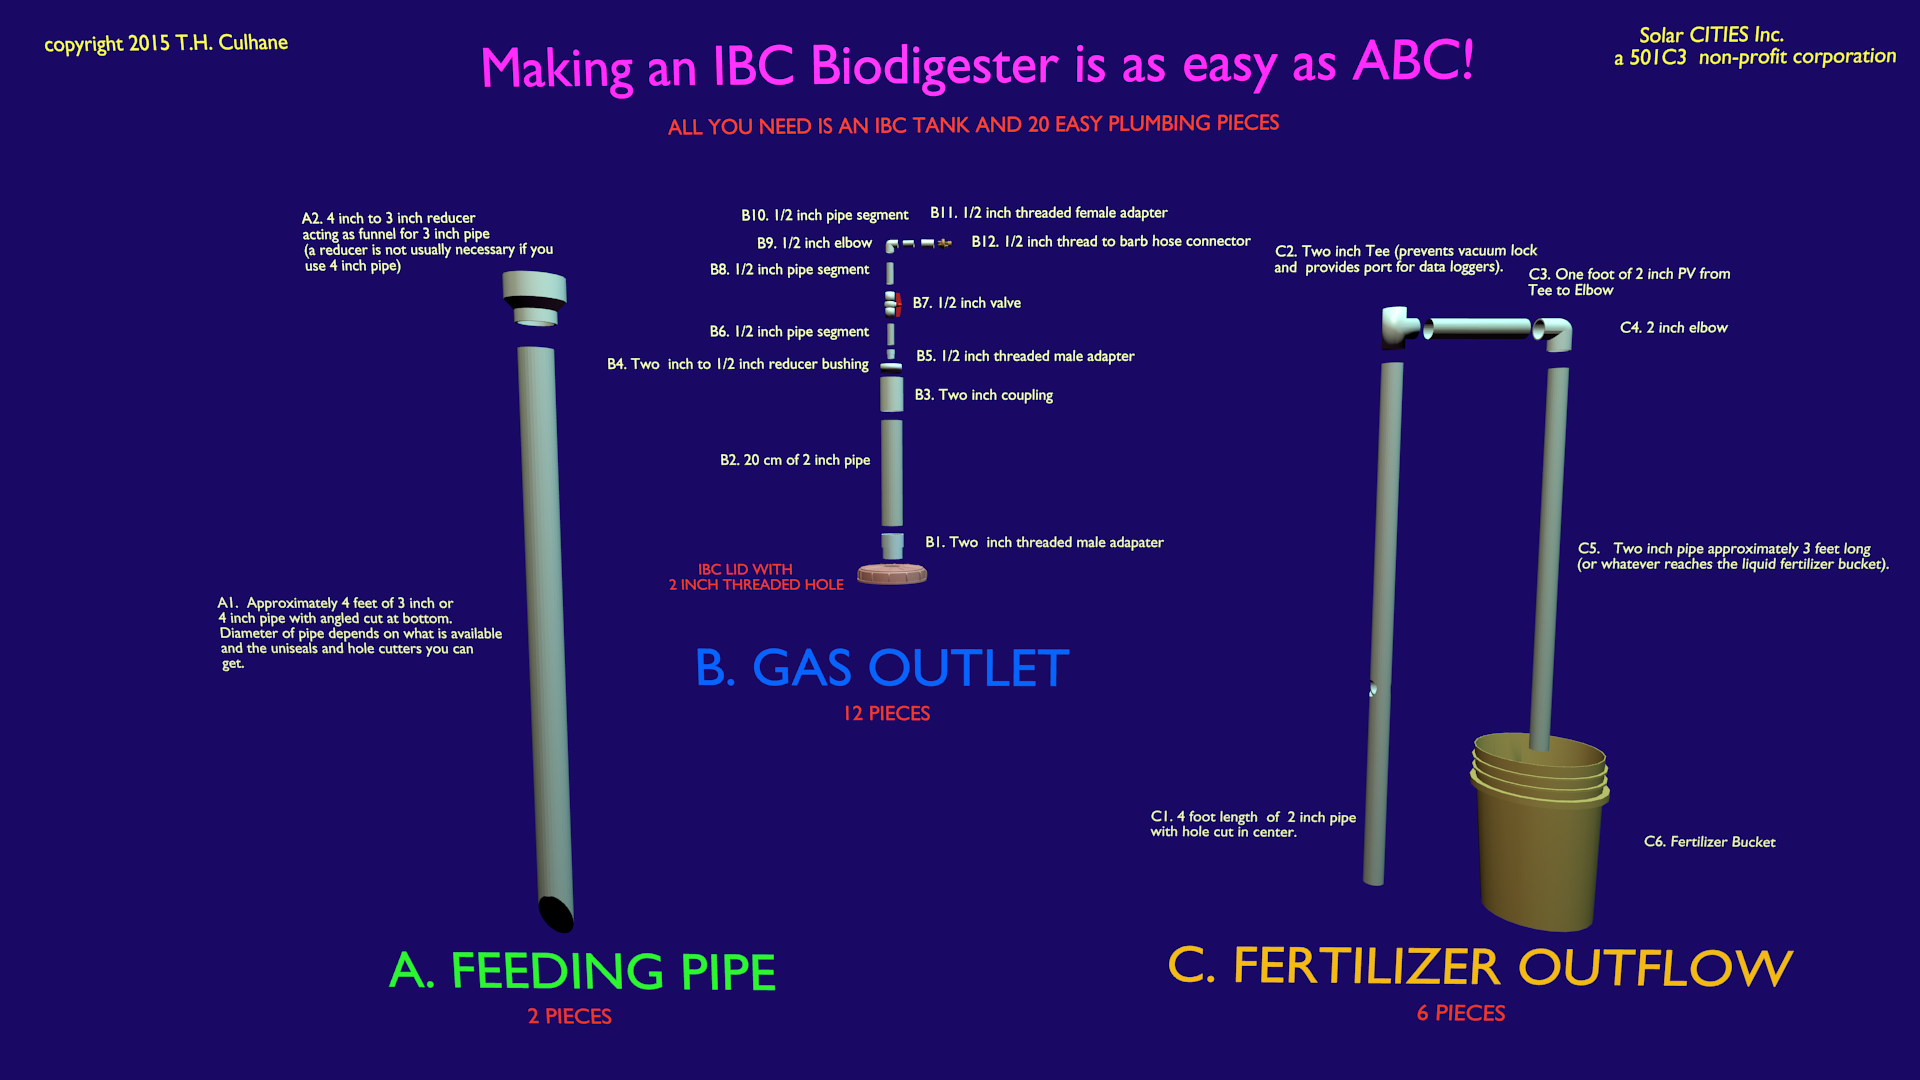 Making an IBC biodigester is as easy as ABC